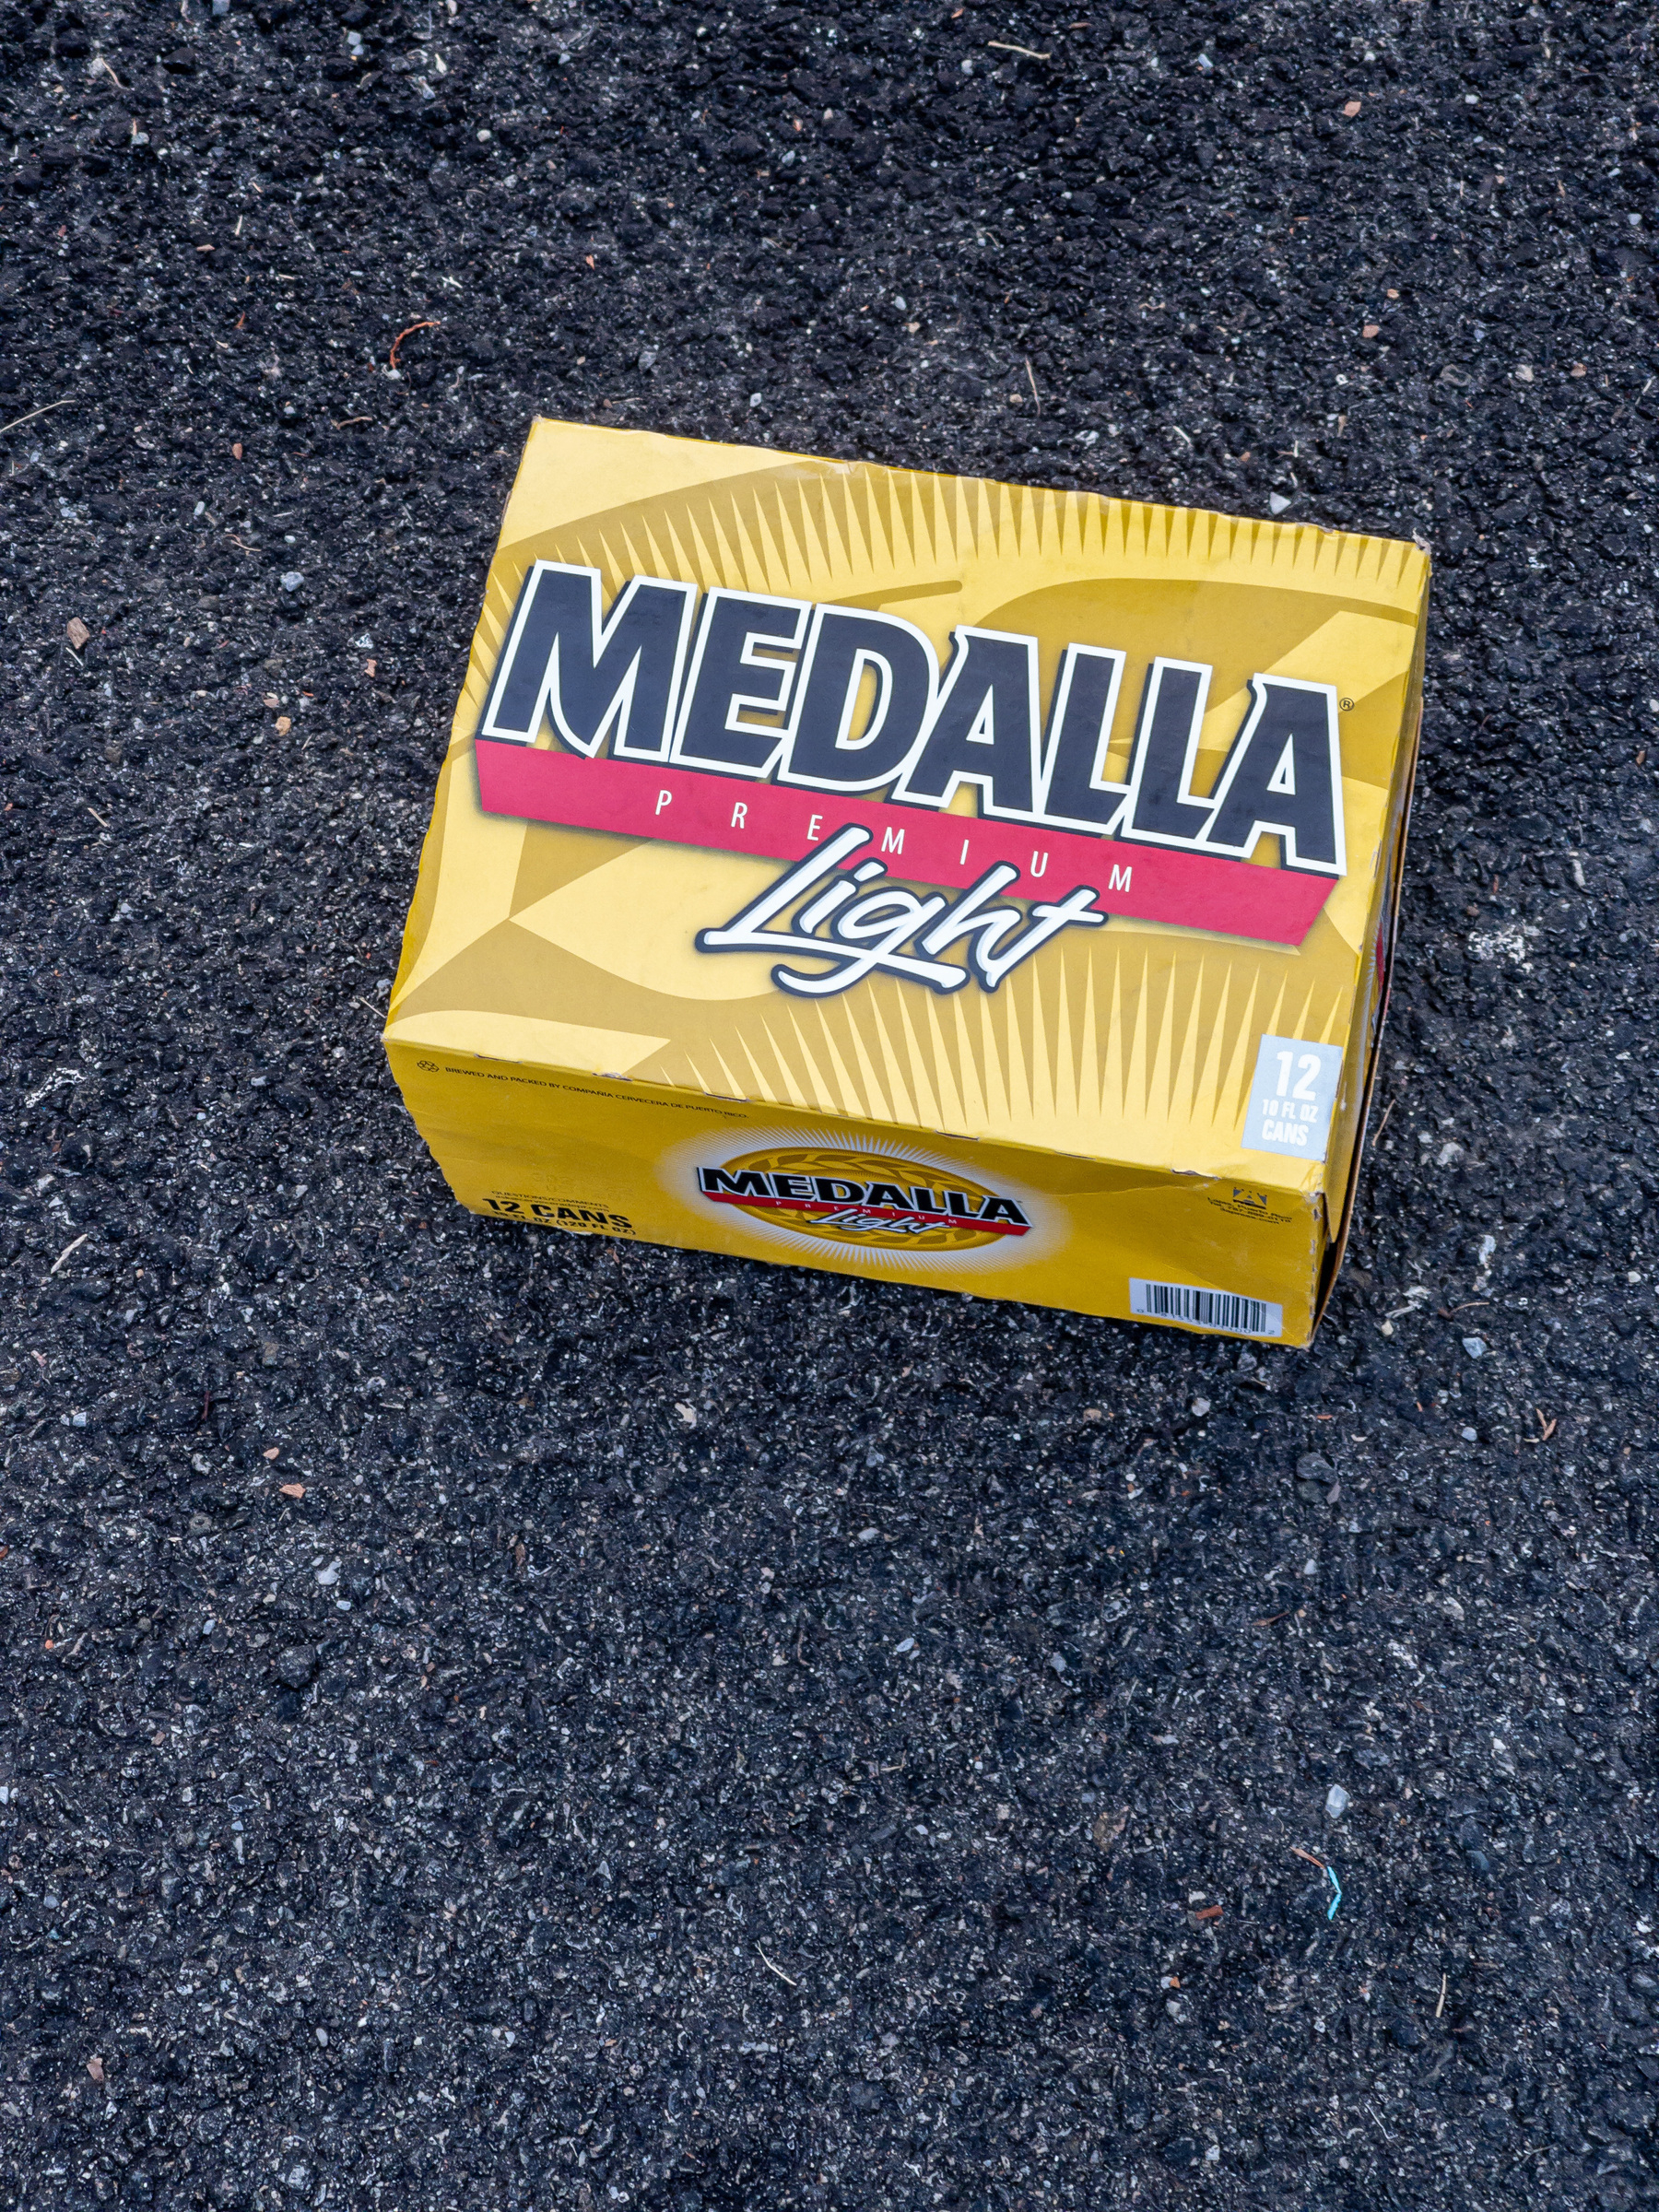 Medalla Premium Light 12 Can box on asphalt pavement. Box is shades of yellow leaf motif background with “light” in script letters, white with black outline. “Premium” is white sans serif lettering on red stripe. “Medalla” is navy blue stylized sans serif lettering with white outline above the red stripe.